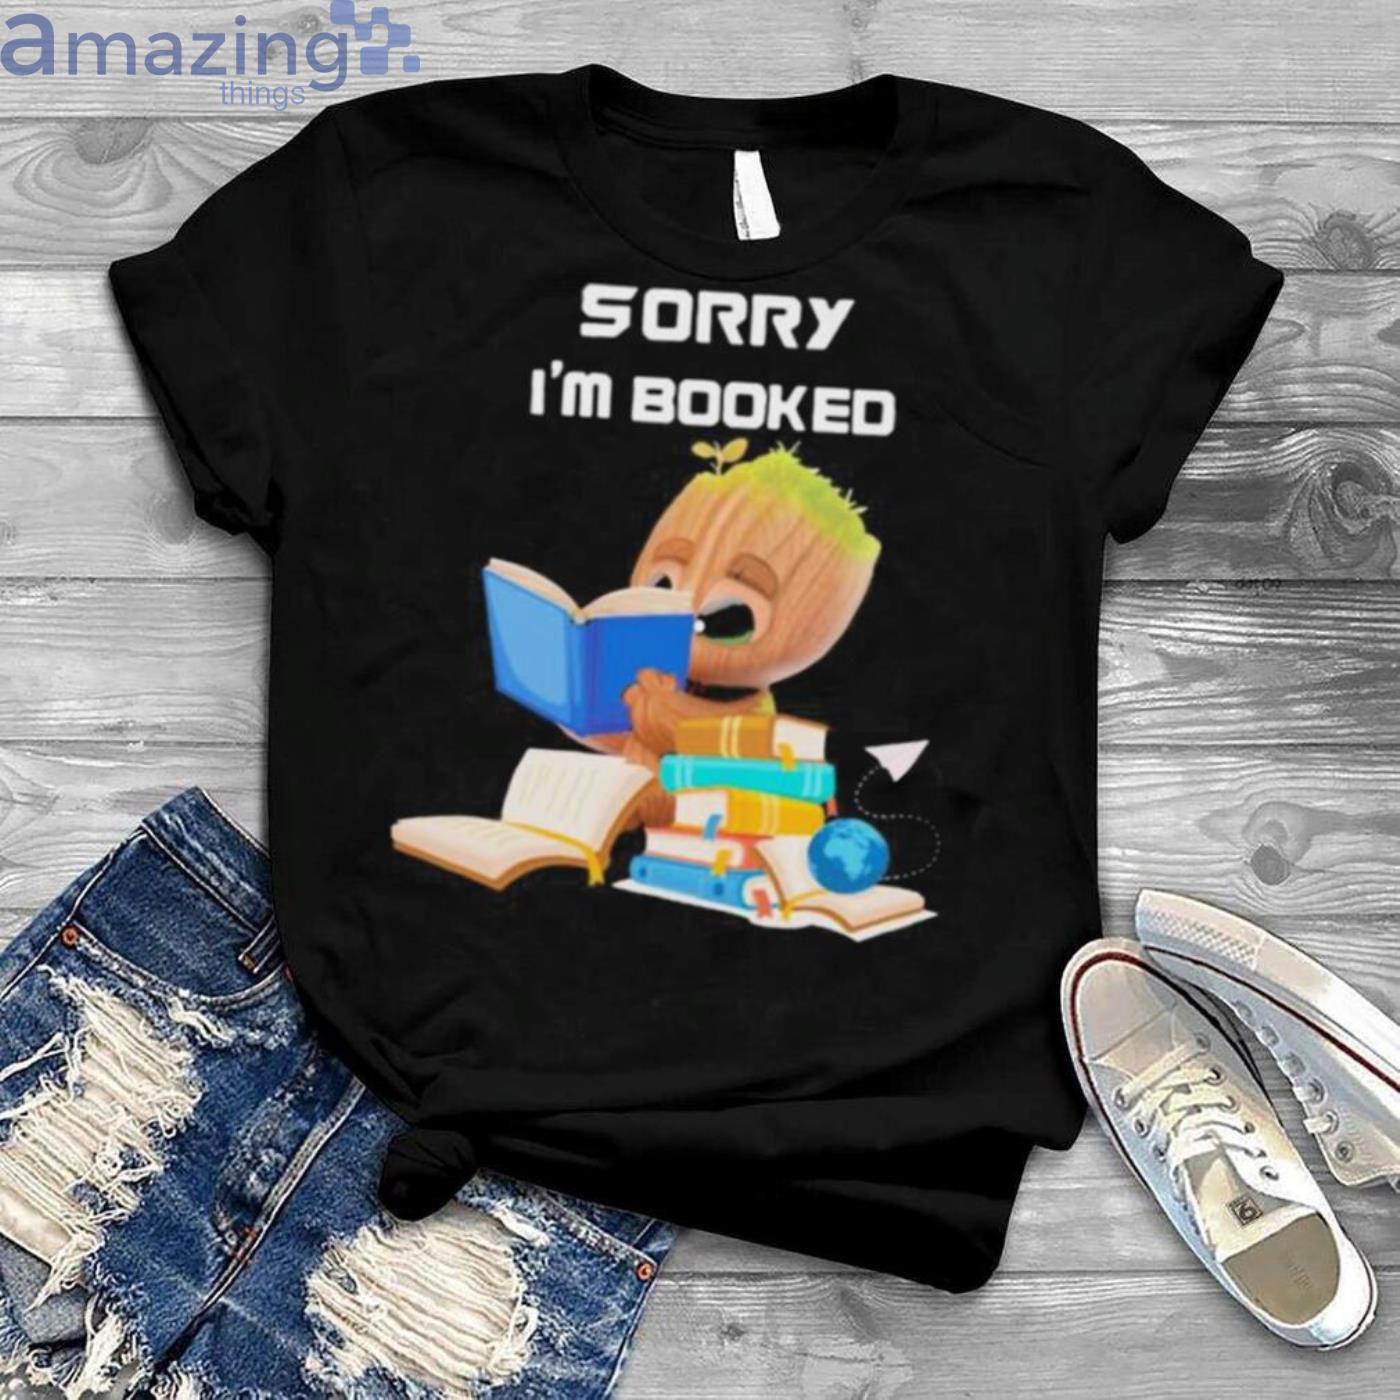 Sorry I'm Booked Baby Groot Shirt Product Photo 1